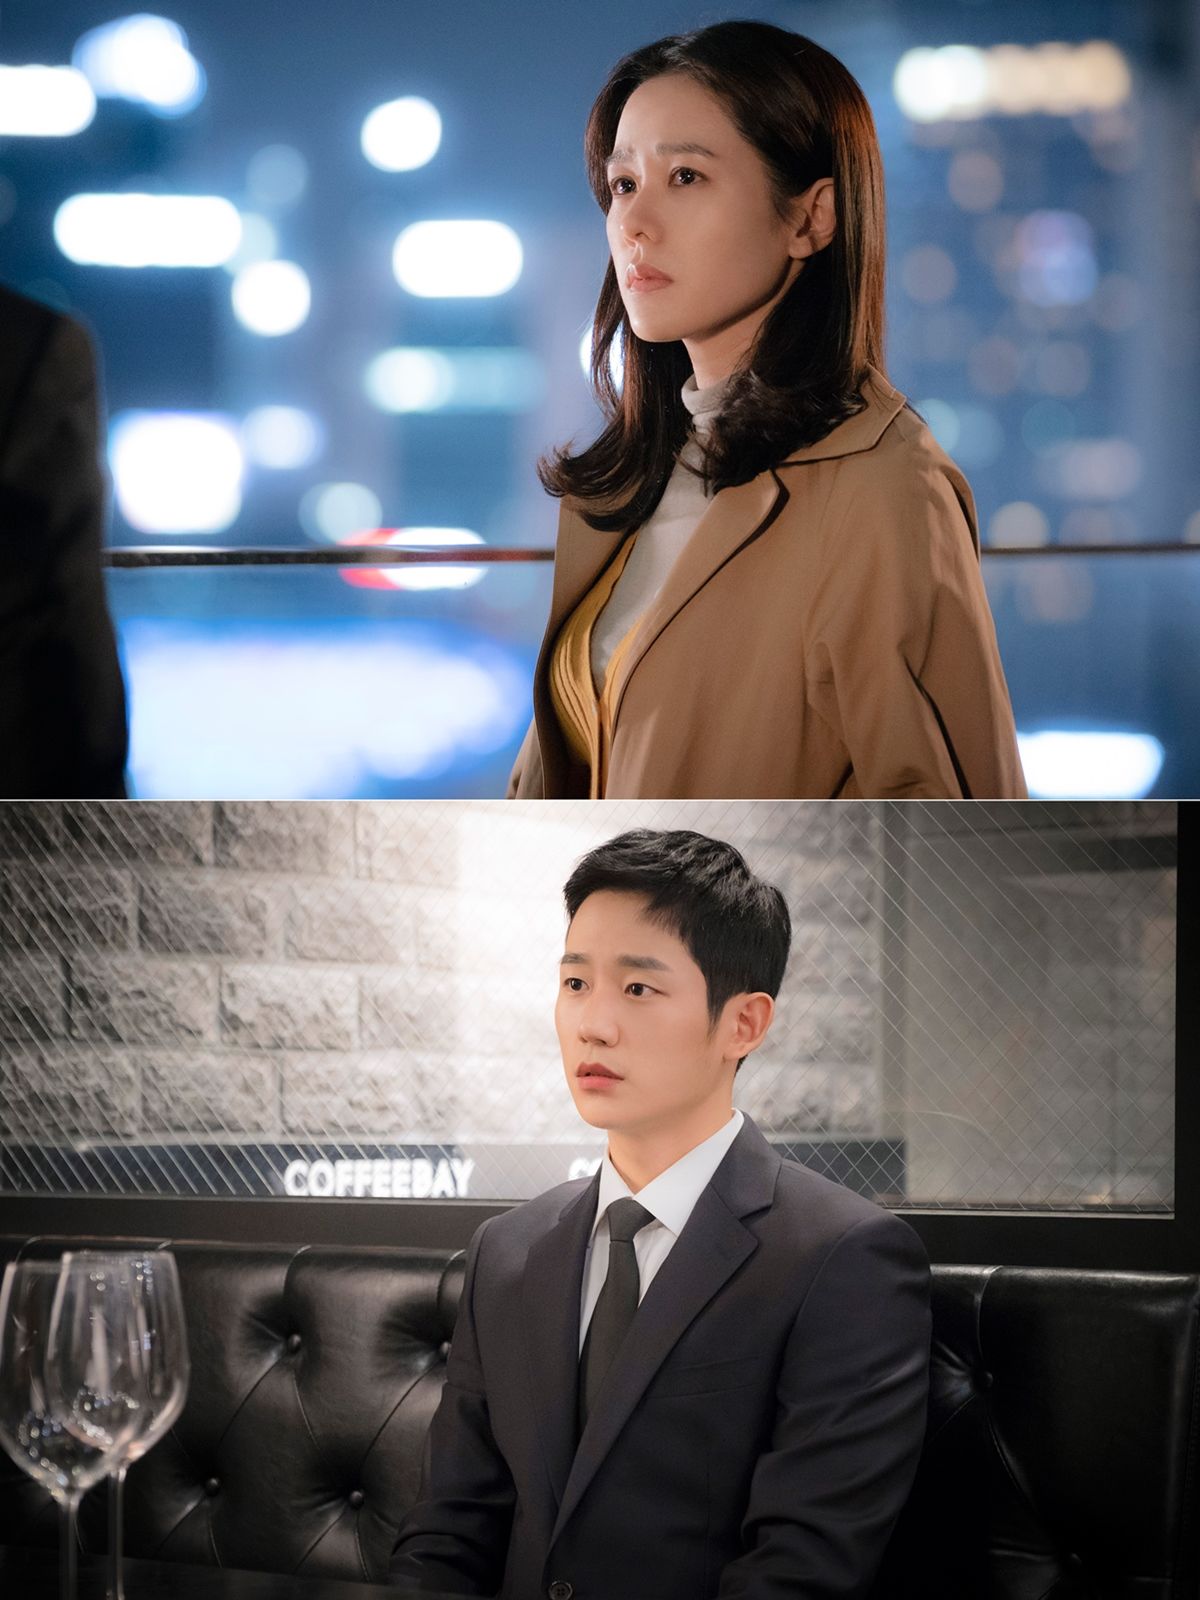 With family opposition and sad Misunderstood piled up in the love affair between Son Ye-jin (Yoon Jin-ah) and Jung Hae In (Seo Jun-hee), I looked at three expected points of the remaining four broadcasts.# Son Ye-jinJung Hae In, a love affair that I want to cheer onSon Ye-jin and Jung Hae In, who did not let go of their hands while quietly enduring the opposition of their families.However, Jung Hae In, who saw Son Ye-jin meet his father Kim Chang-wan, was greatly angry and Misunderstood was built between the two.Jung Hae In had a deep Feeling goal for his father who abandoned his family, and Son Ye-jin would have wanted to give news of his son who grew up well.The knot has been twisted between the two, but there is a reason to support this love to the end.Son Ye-jin and Jung Hae In continued their direct romance of expressing their sincerity and honest apology at every moment of crisis and looking at each other only.Therefore, there is a growing expectation that the hard love that protects them and how the unwavering faith will solve Misunderstood and draw a sweet love story again.# The presence of Father Kim Chang-wanFor Jung Hae In and So-yeon Jang (Seo Kyung-sun) siblings, the father is not a loving family but just a hurting person.Gil Hae-yeon (Kim Mi-yeon), who told Jung Hae In, You cant reach my standards, is also the biggest reason for opposing her love affair with Son Ye-jin.In the last 12 episodes, my father broke my heart by saying still to So-yeon Jang, who I met for a long time, and I was ignored by Jung Hae In.However, since Jung Hae In, who had to be ignored because his parents were not there, attention is focused on how his fathers appearance will affect the relationship between Son Ye-jin and Jung Hae In.Especially in the 13th preview, Junhees father is drawn to meet Jin-ahs parents, and he is more curious about what kind of presence he will show.Real Love and Good Growth